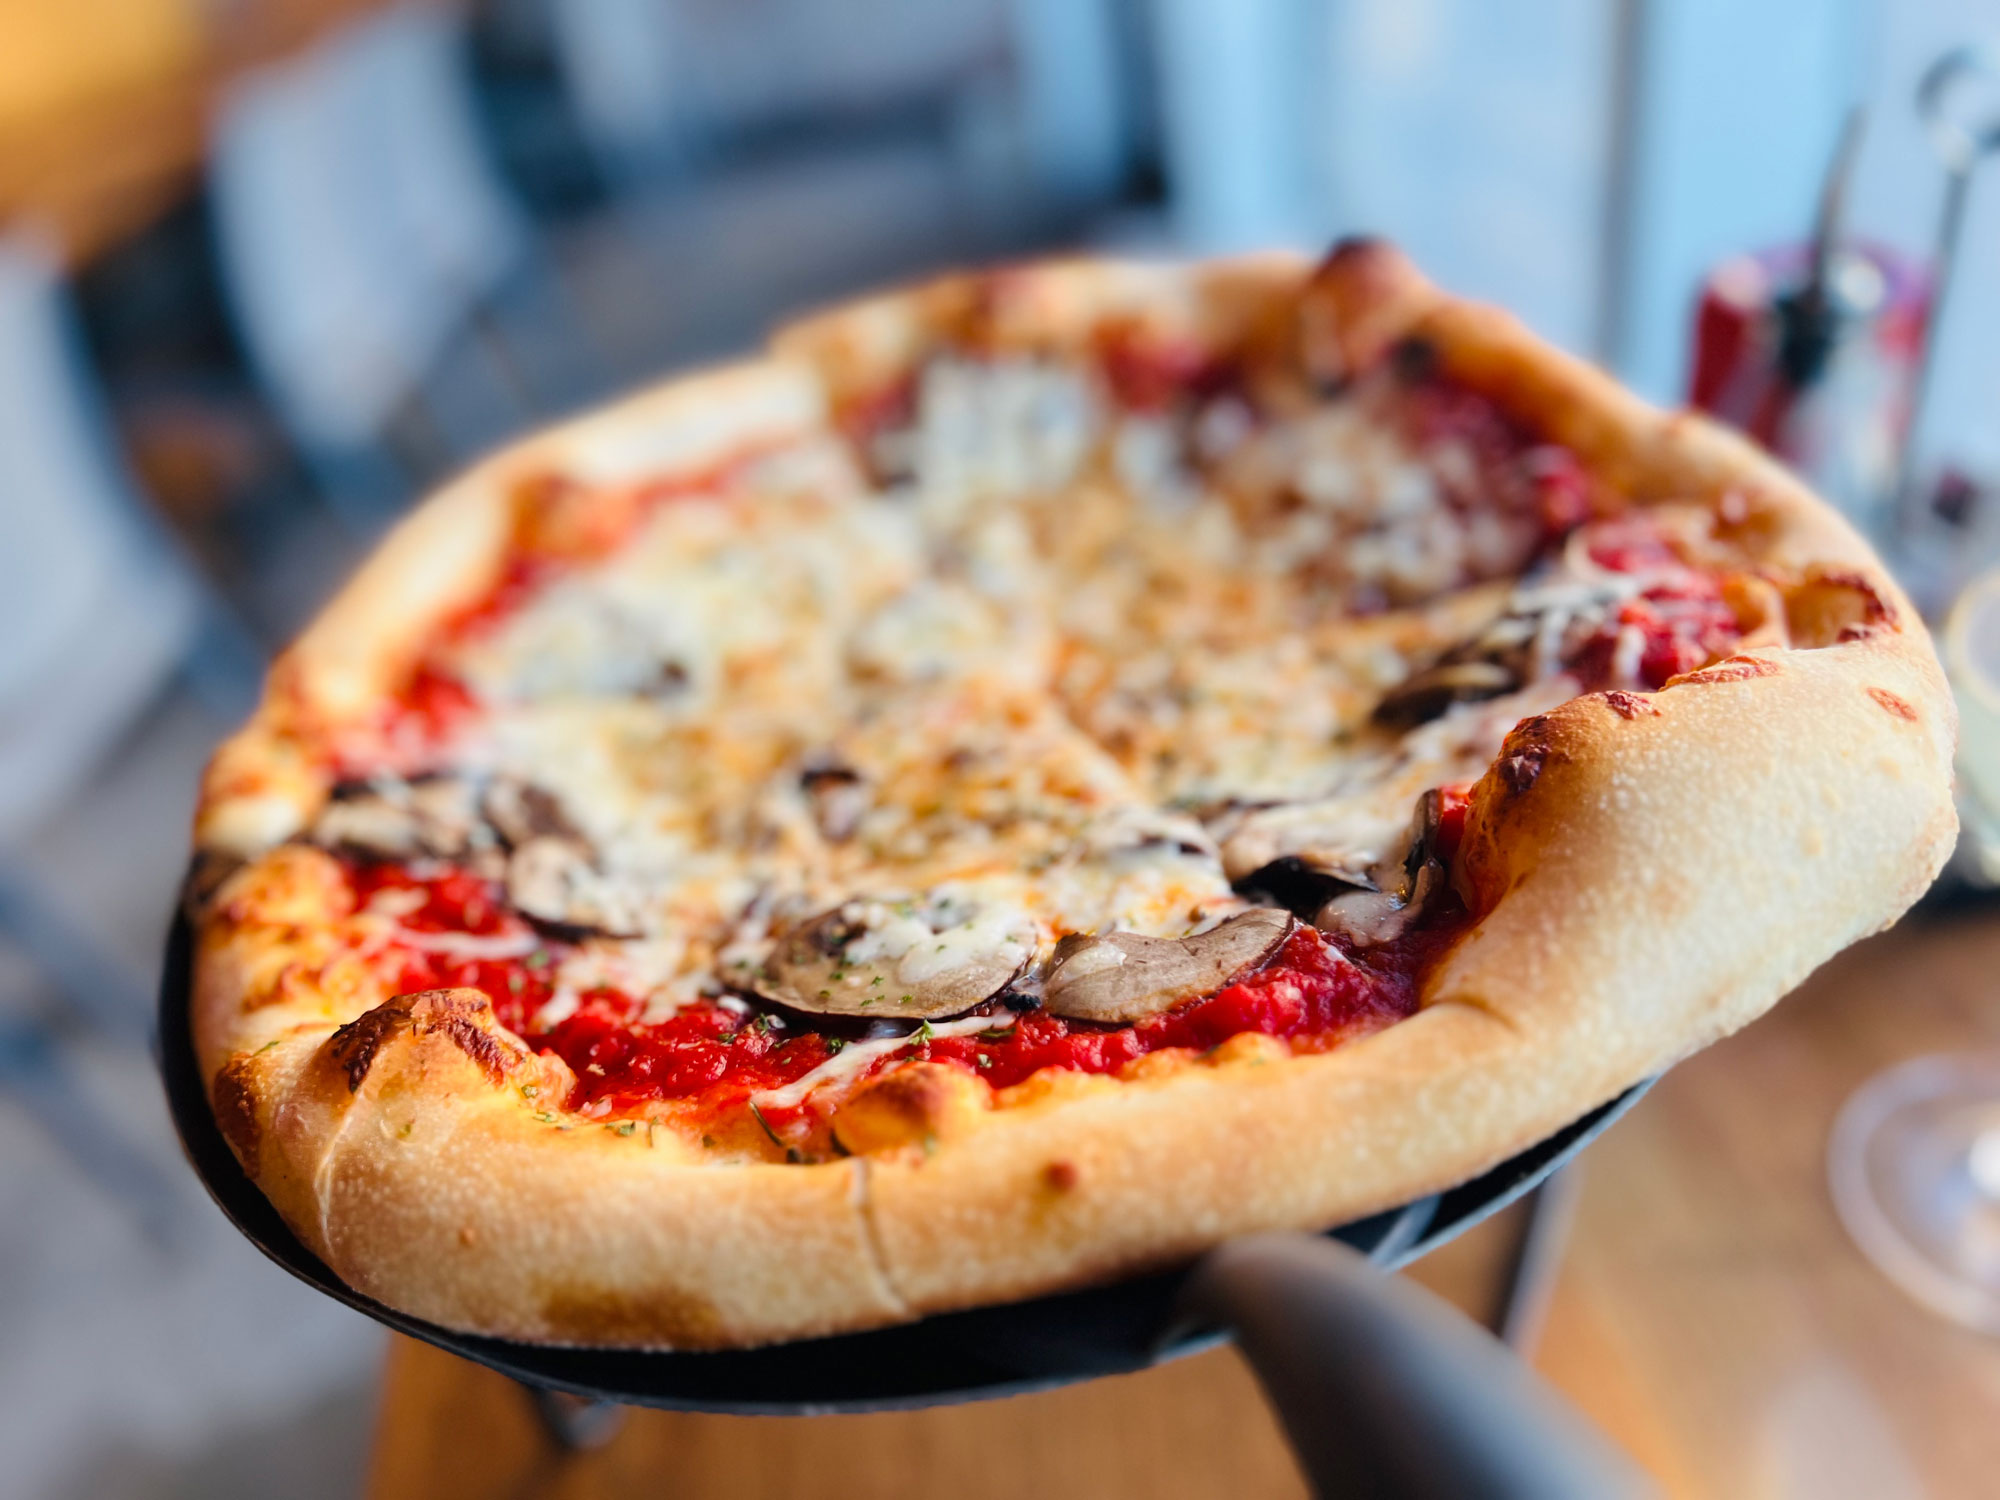 Simplicity is Best When It Comes To Authentic Italian-style Pizza